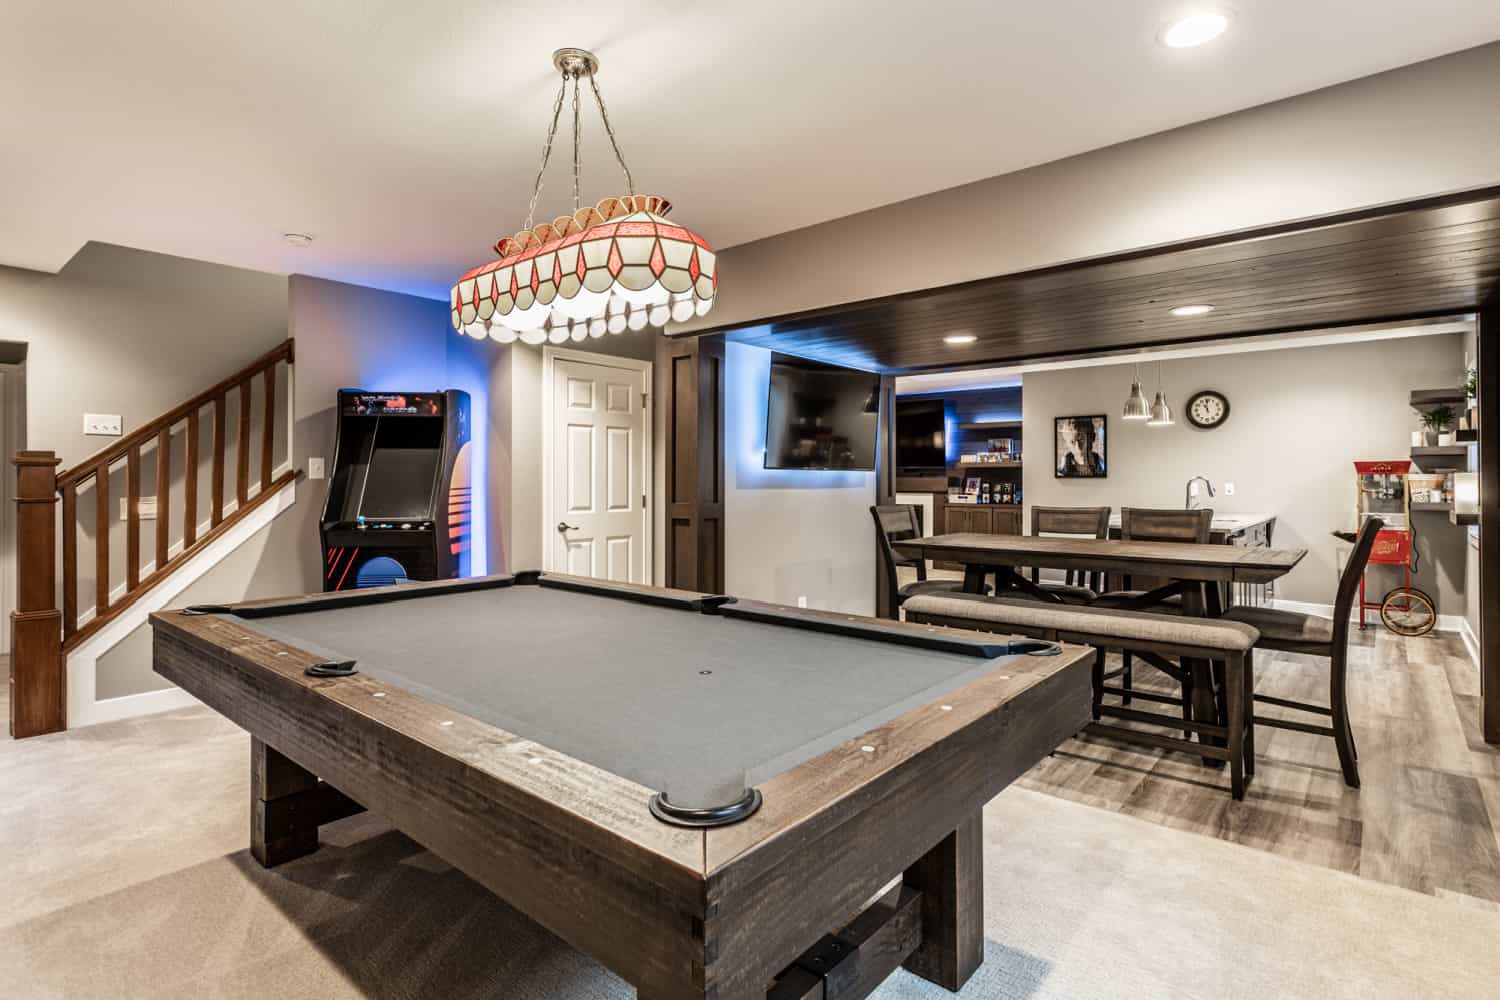 Nicholas Design Build | Remodeling a basement with both a pool table and a bar.